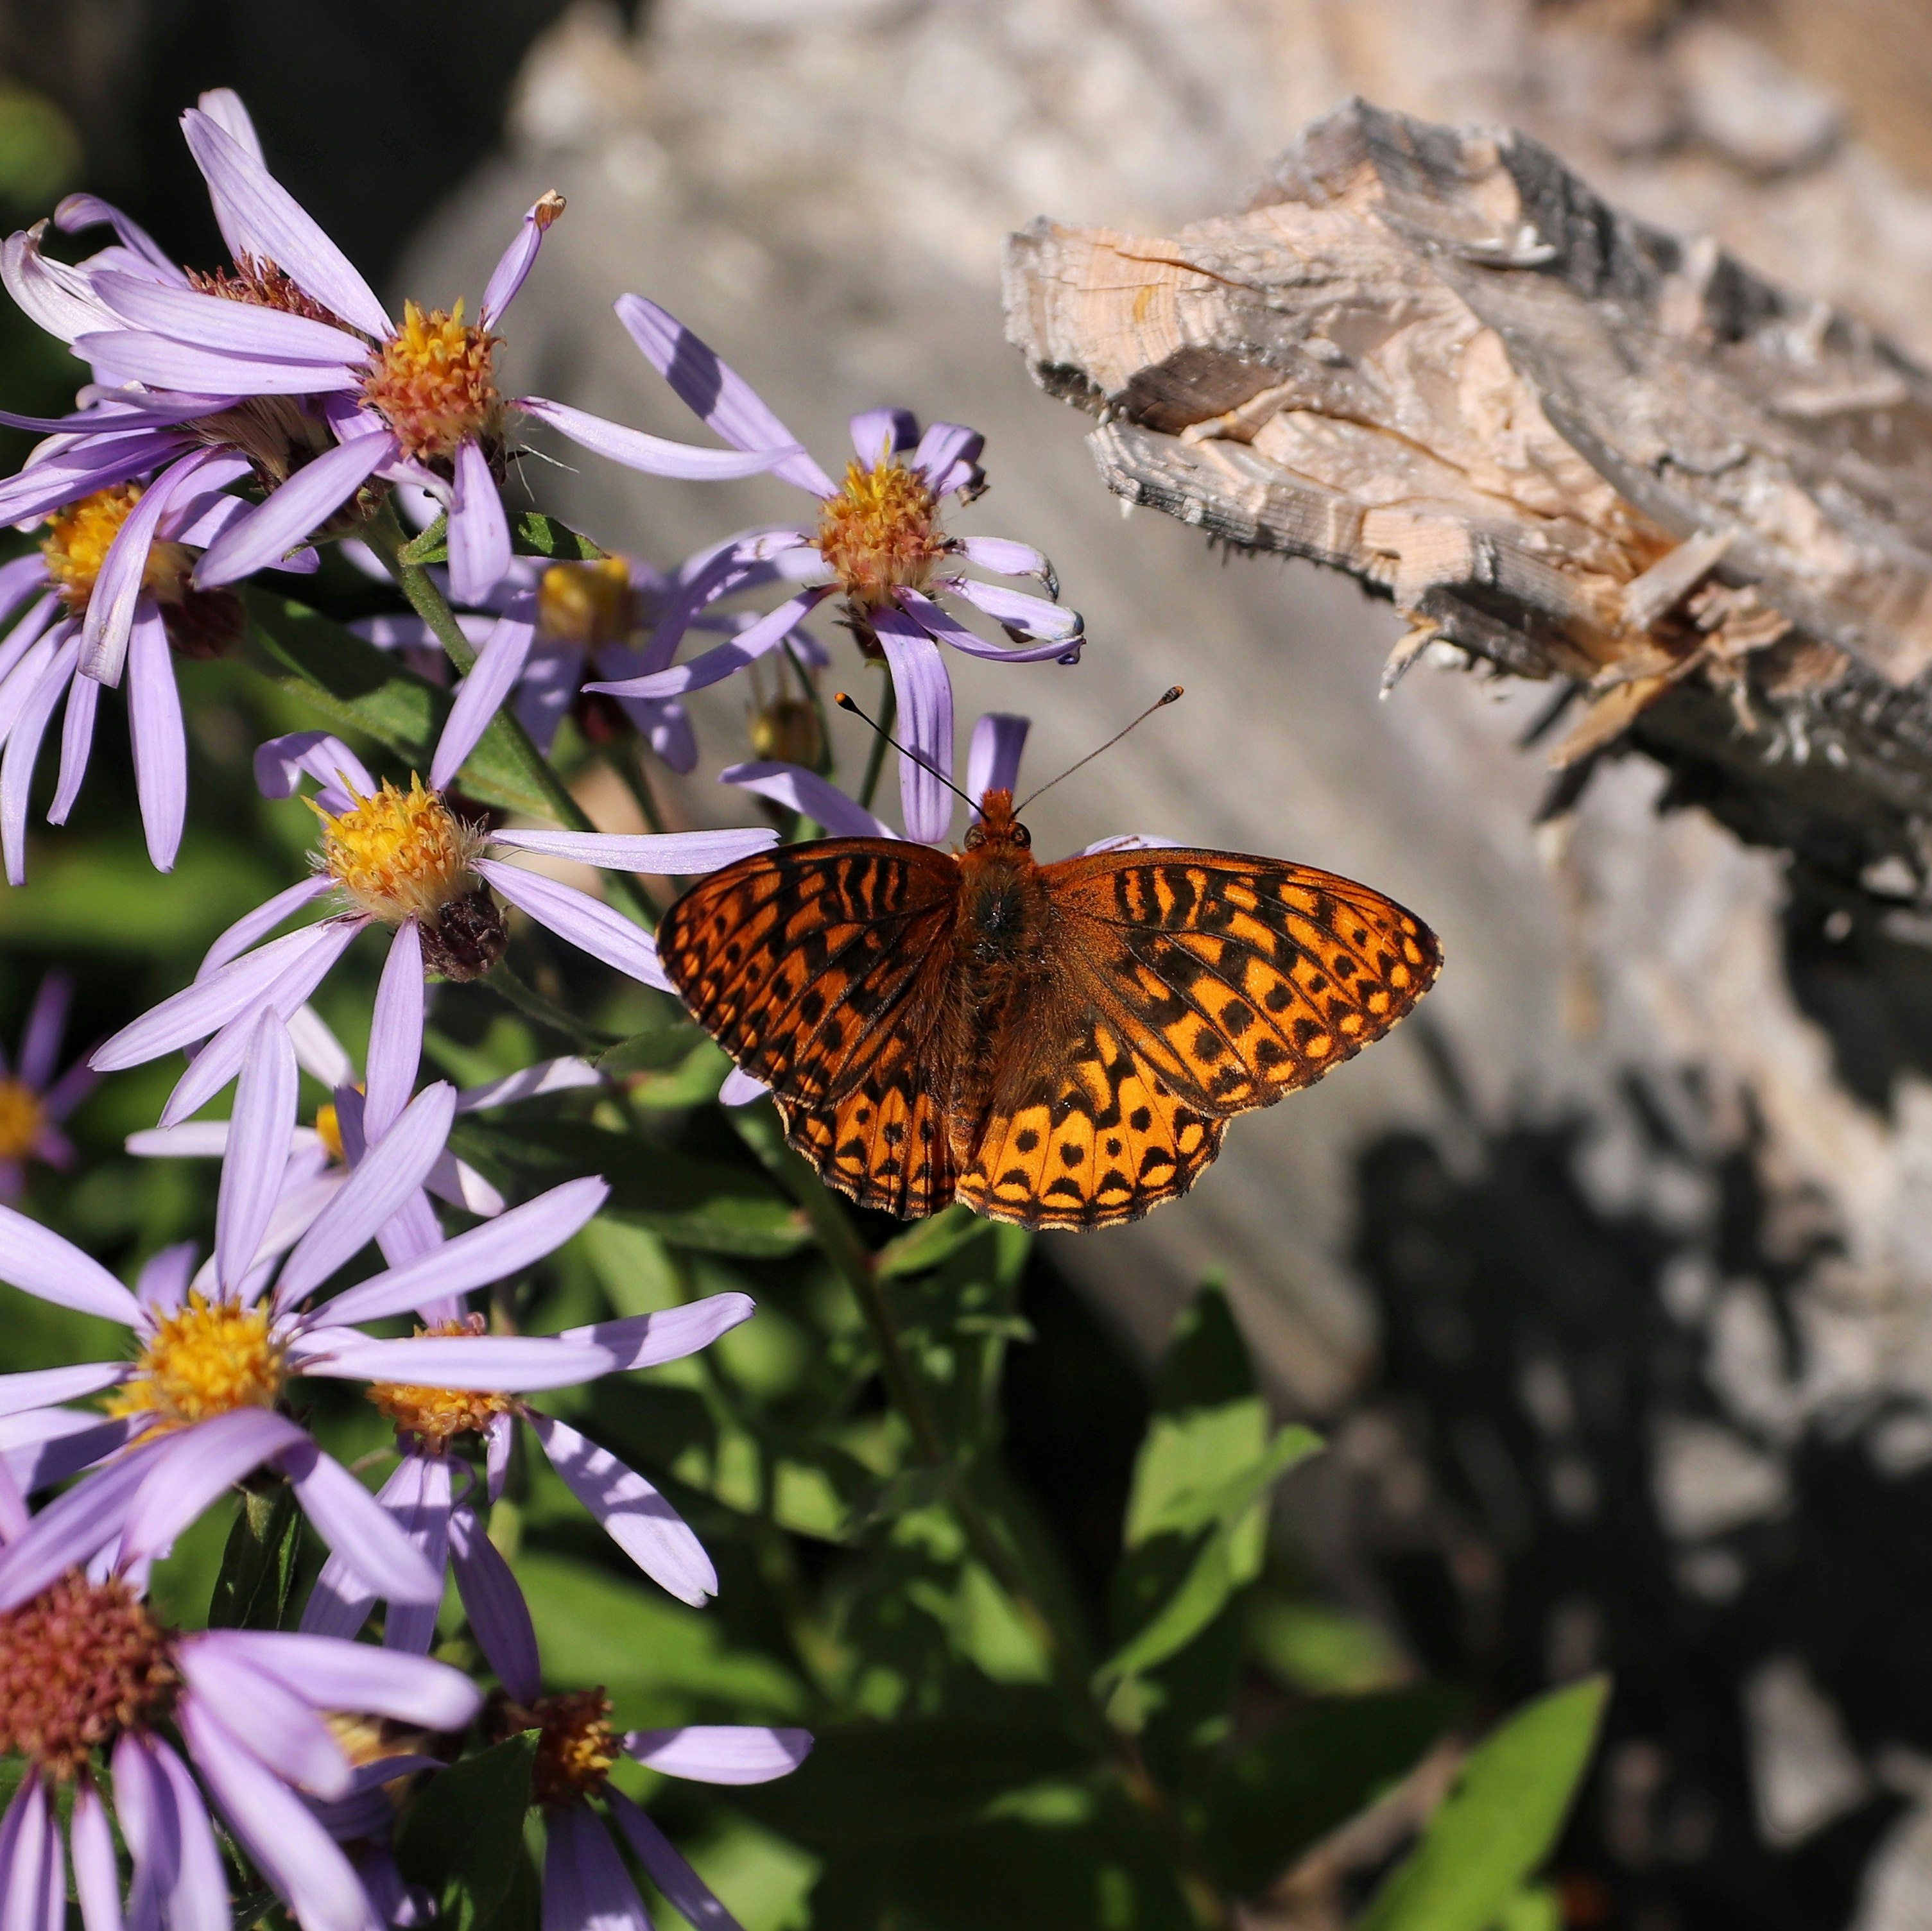 brown and black butterfly on purple and white flower during daytime